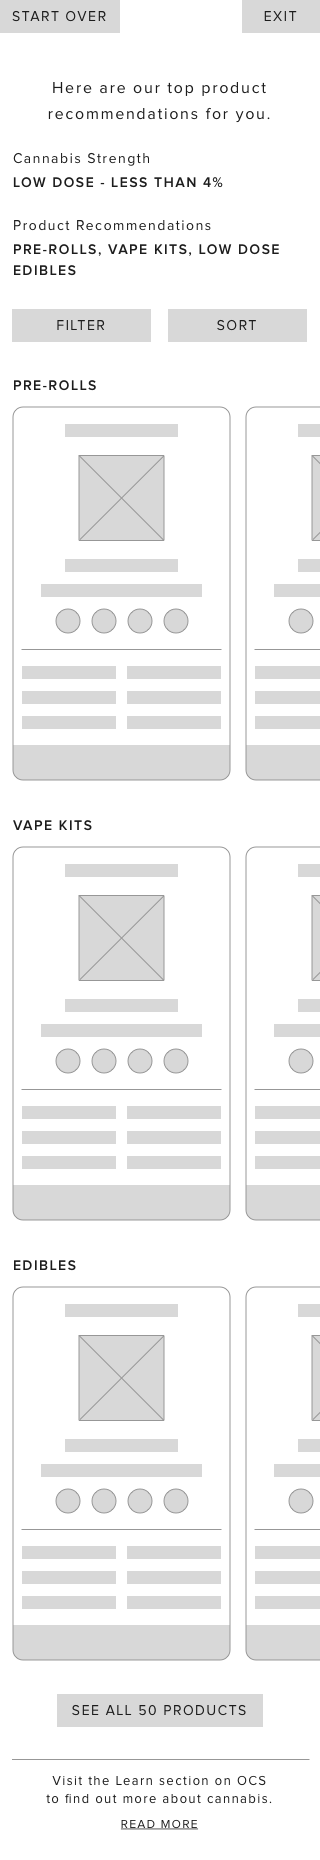 shopping guide, novice user wireframe, product results